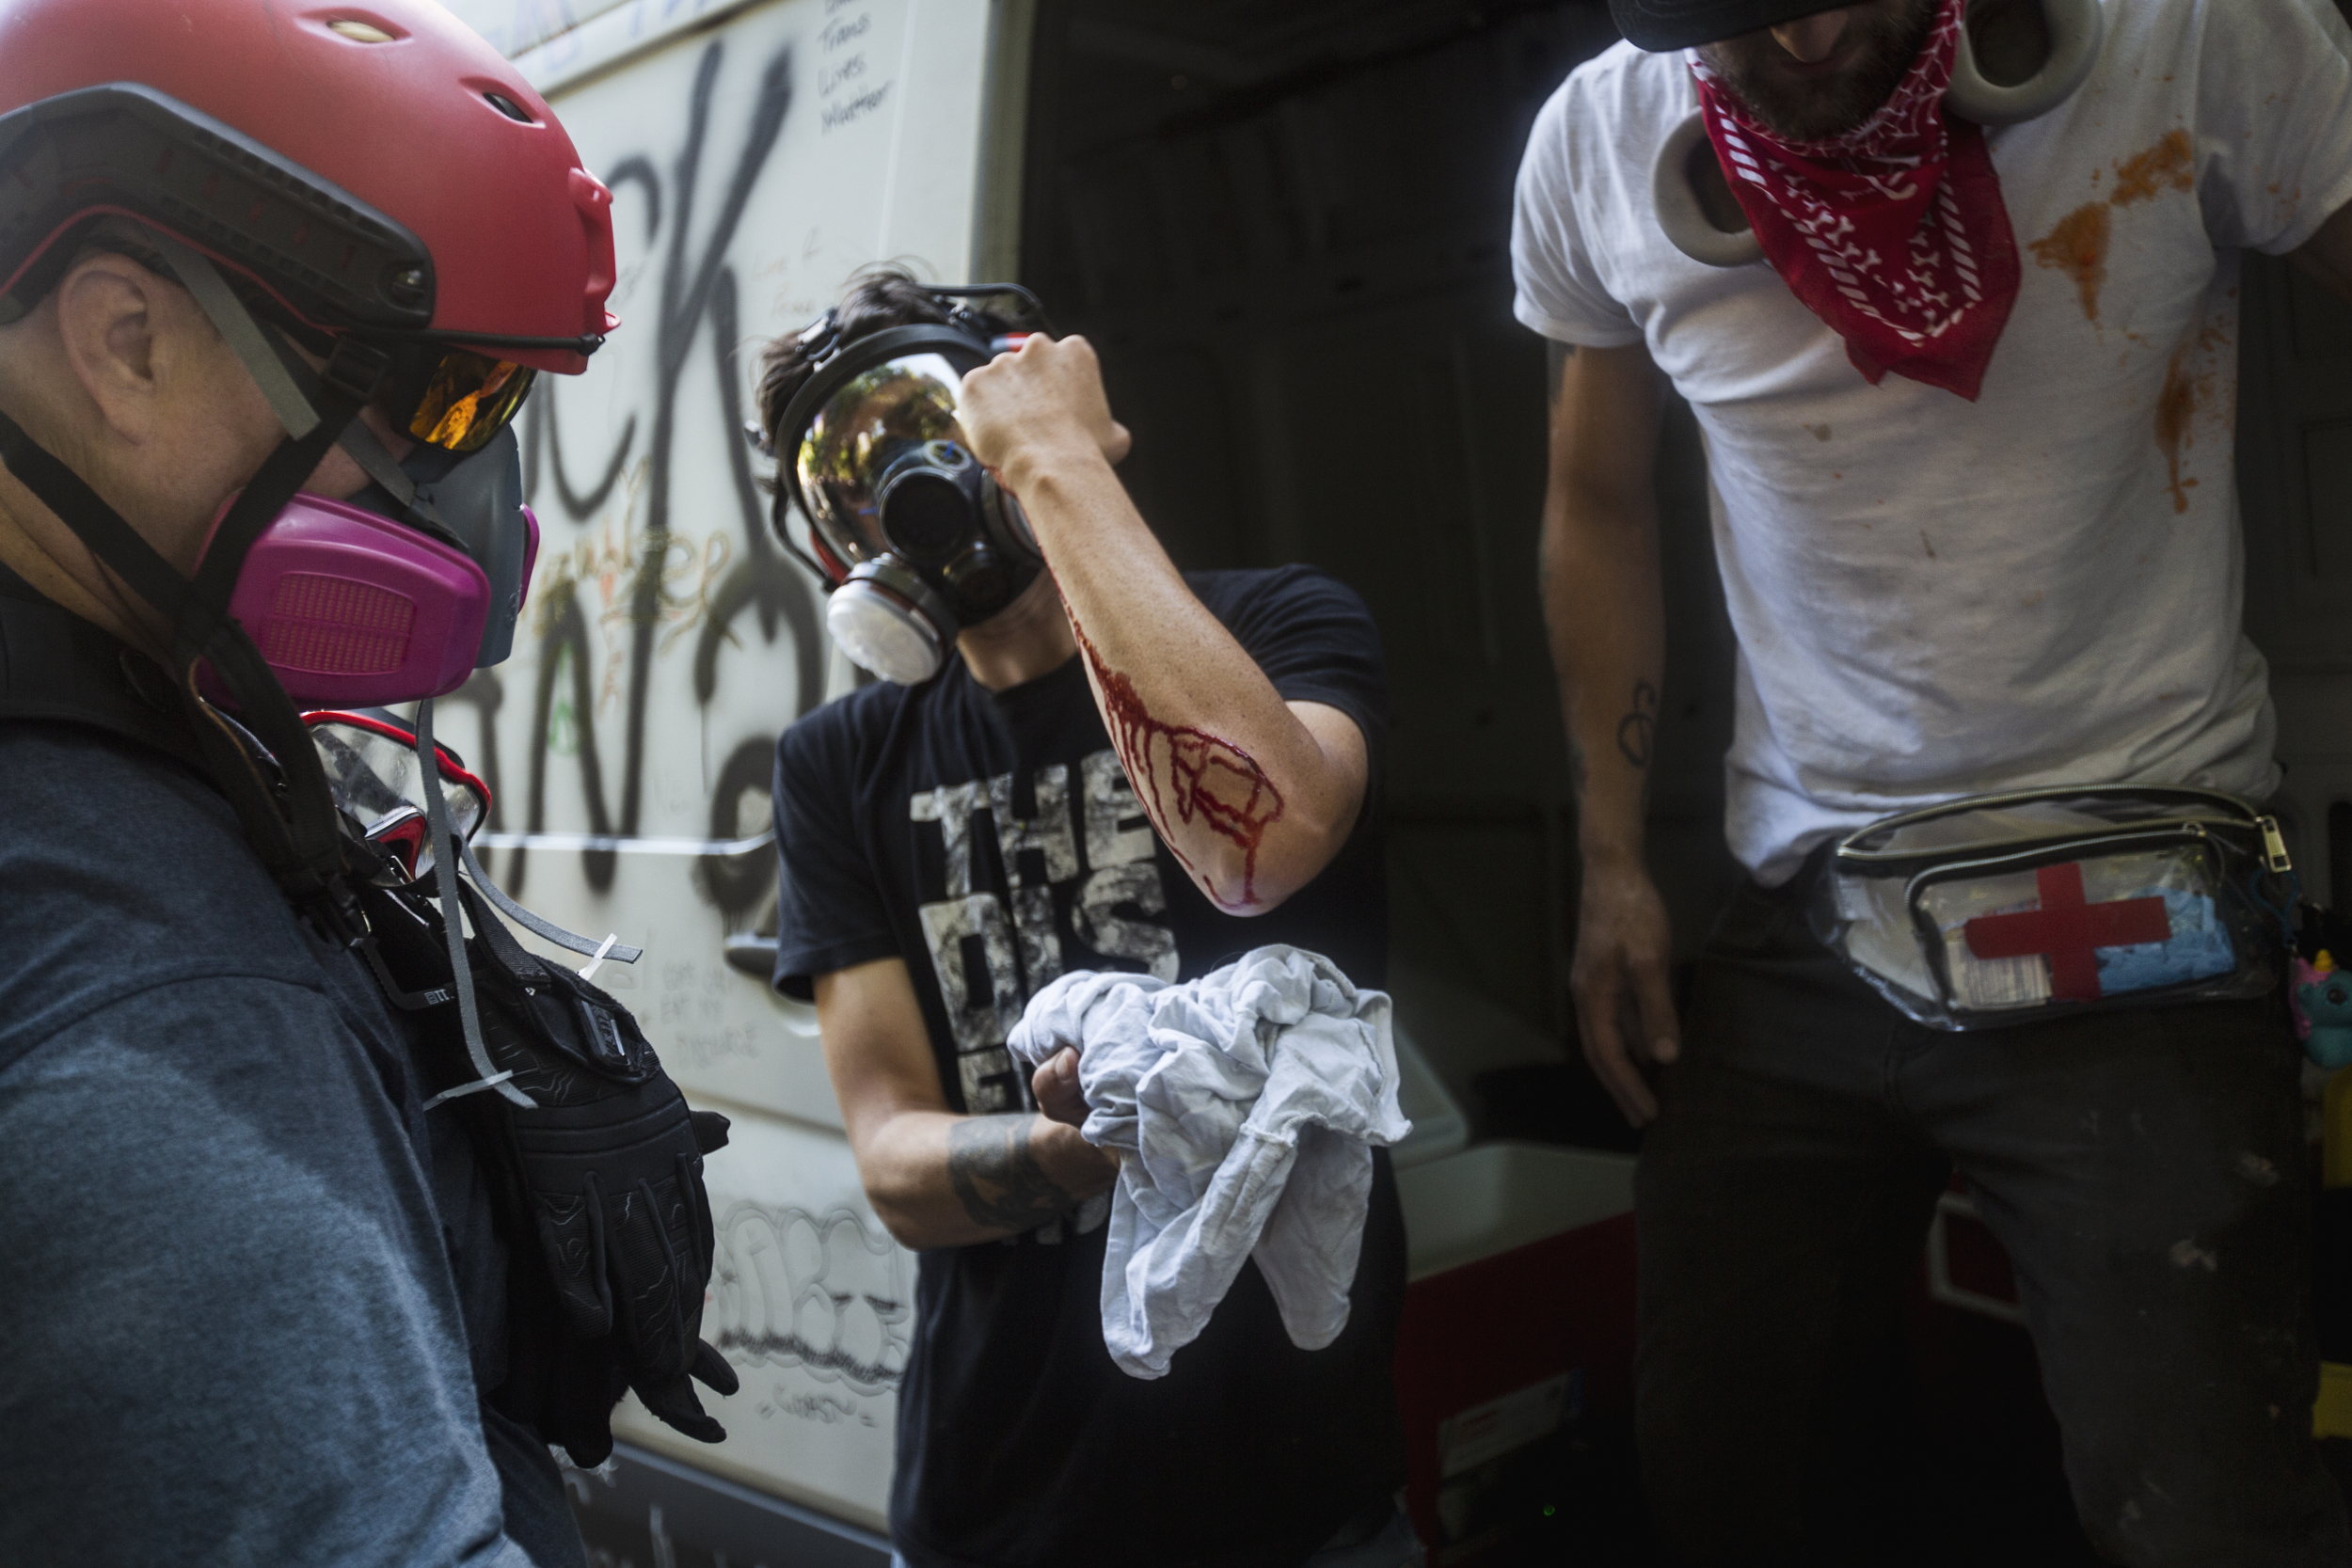 A man receives help for his injury as far-right organizers organized with the stated goal of Òsaying no to MarxismÓ clash at the Justice Center in Portland on August 22, 2020, during multiple counter-protests from left-wing, anti-fascist groups and Black Lives Matter groups.